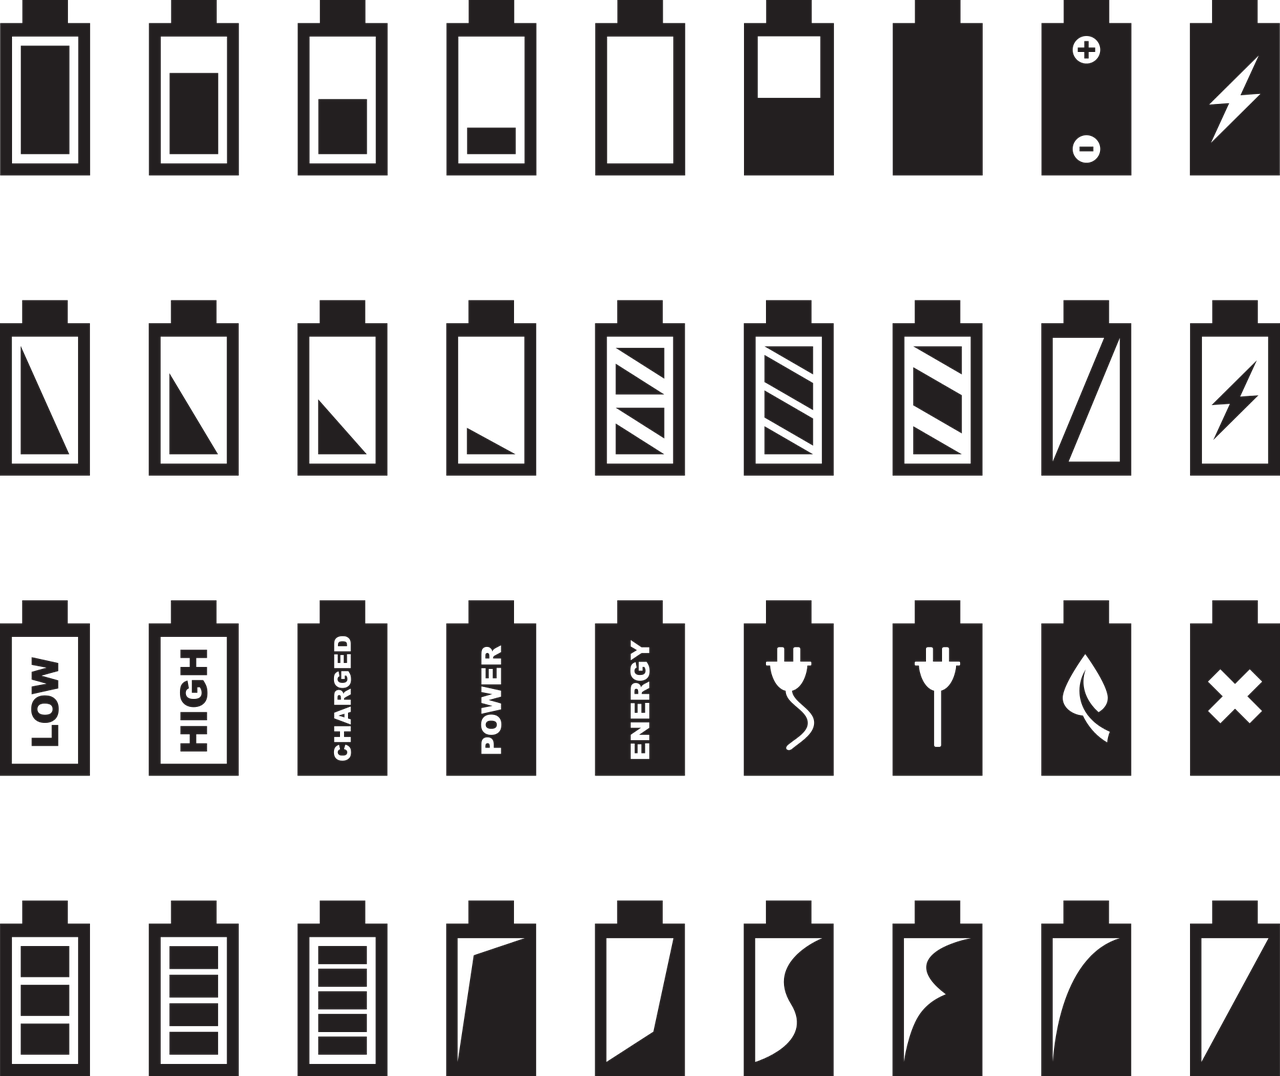 A black and white illustration of a battery displaying different levels of charge.